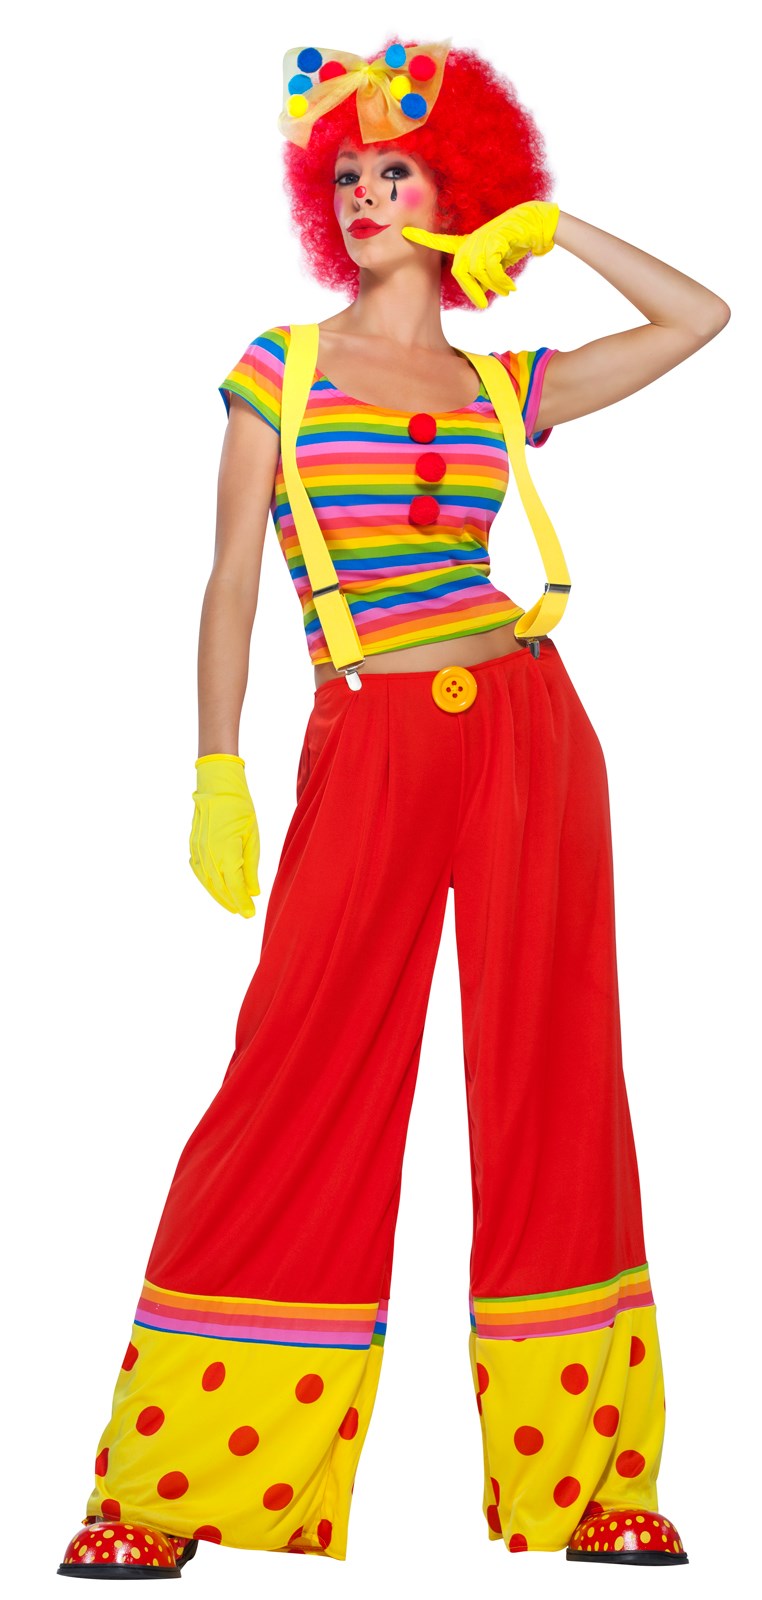 Moppie The Clown - Adult Costume